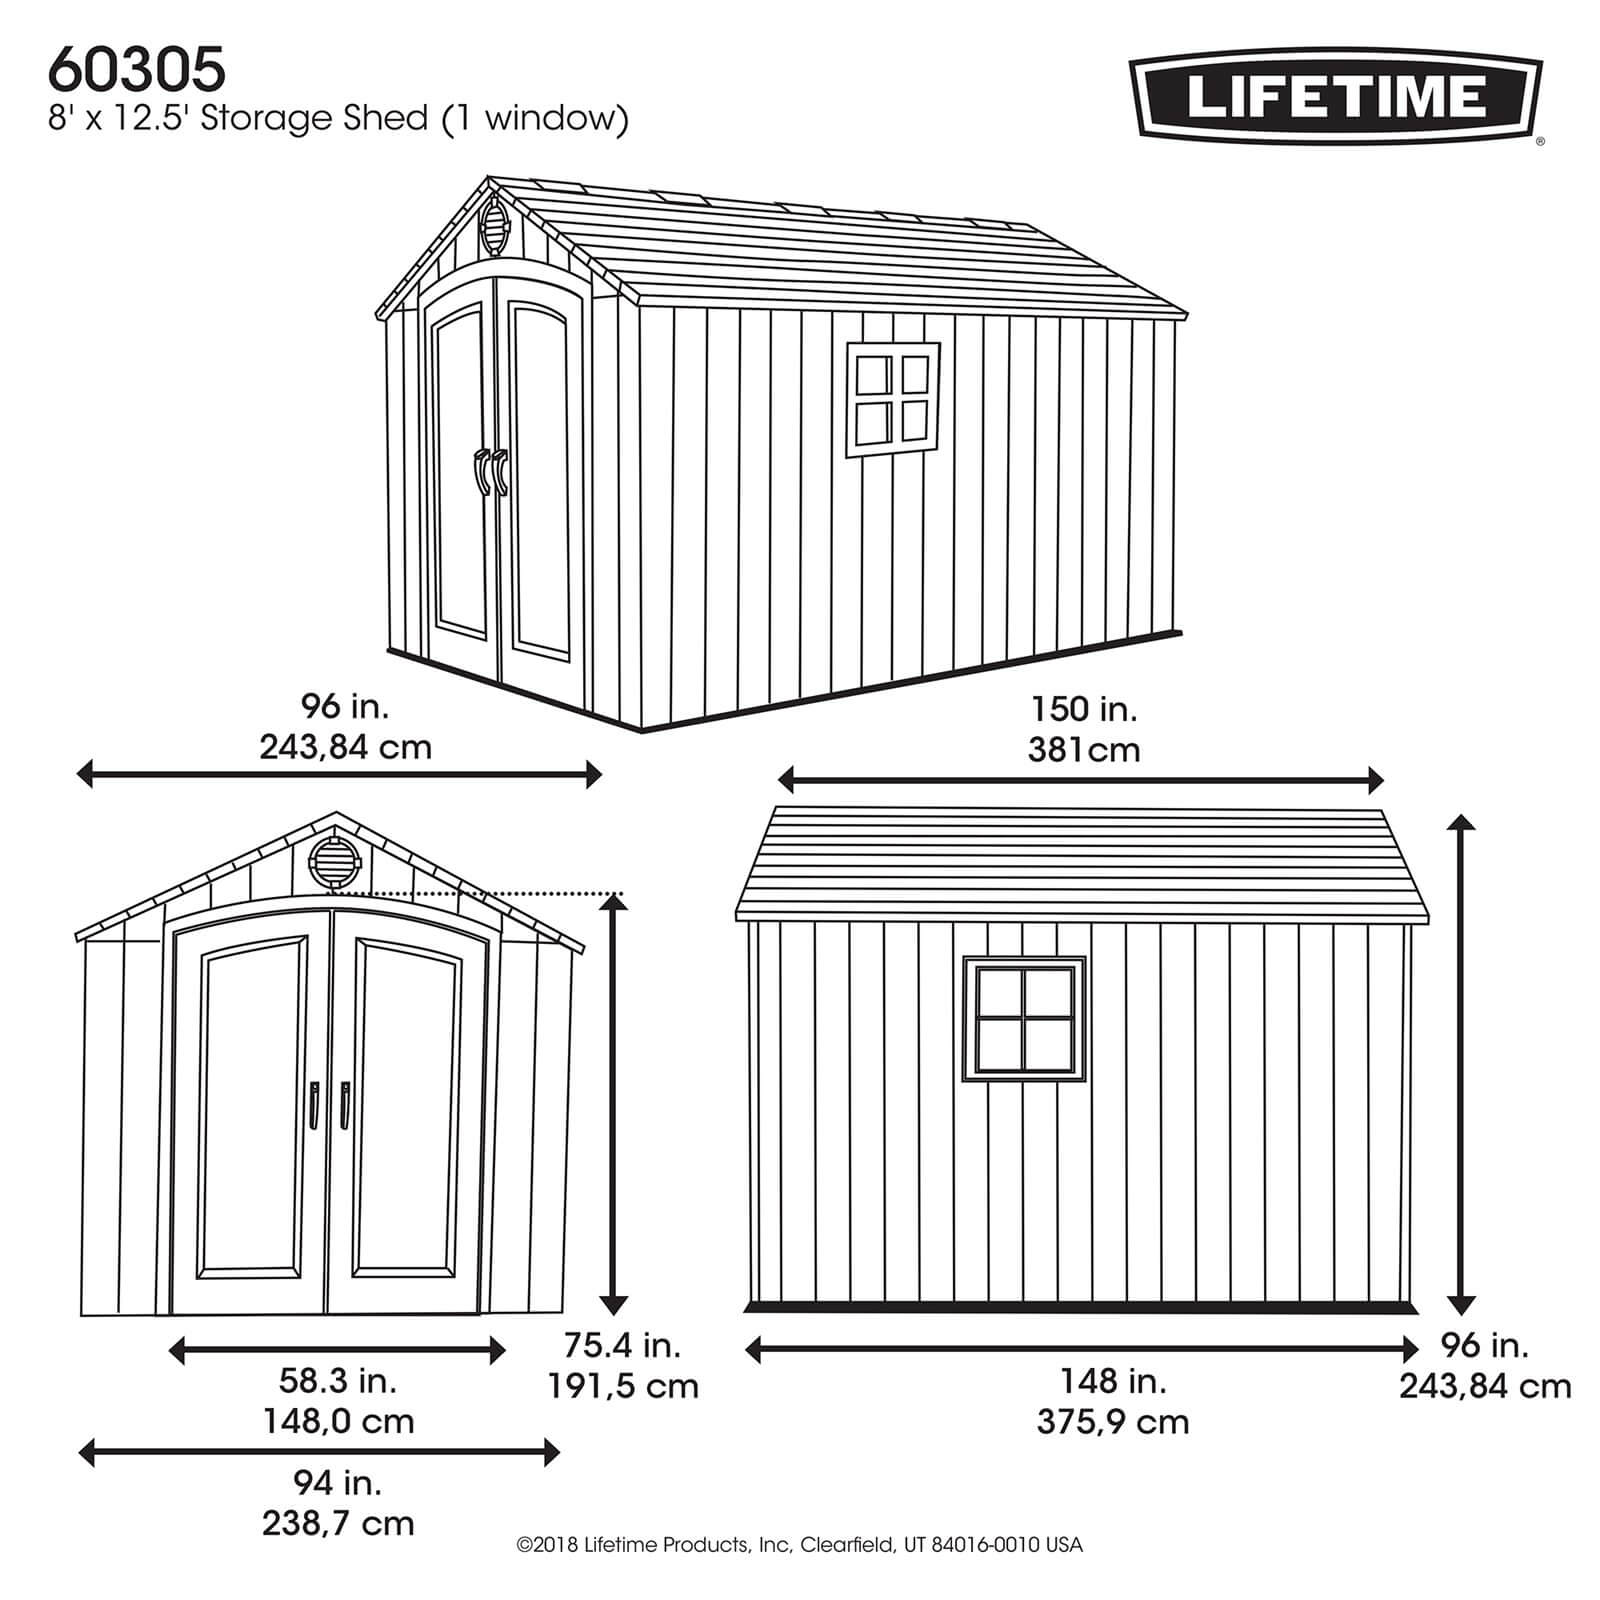 Lifetime 8x12.5 ft Rough Cut Outdoor Storage Shed